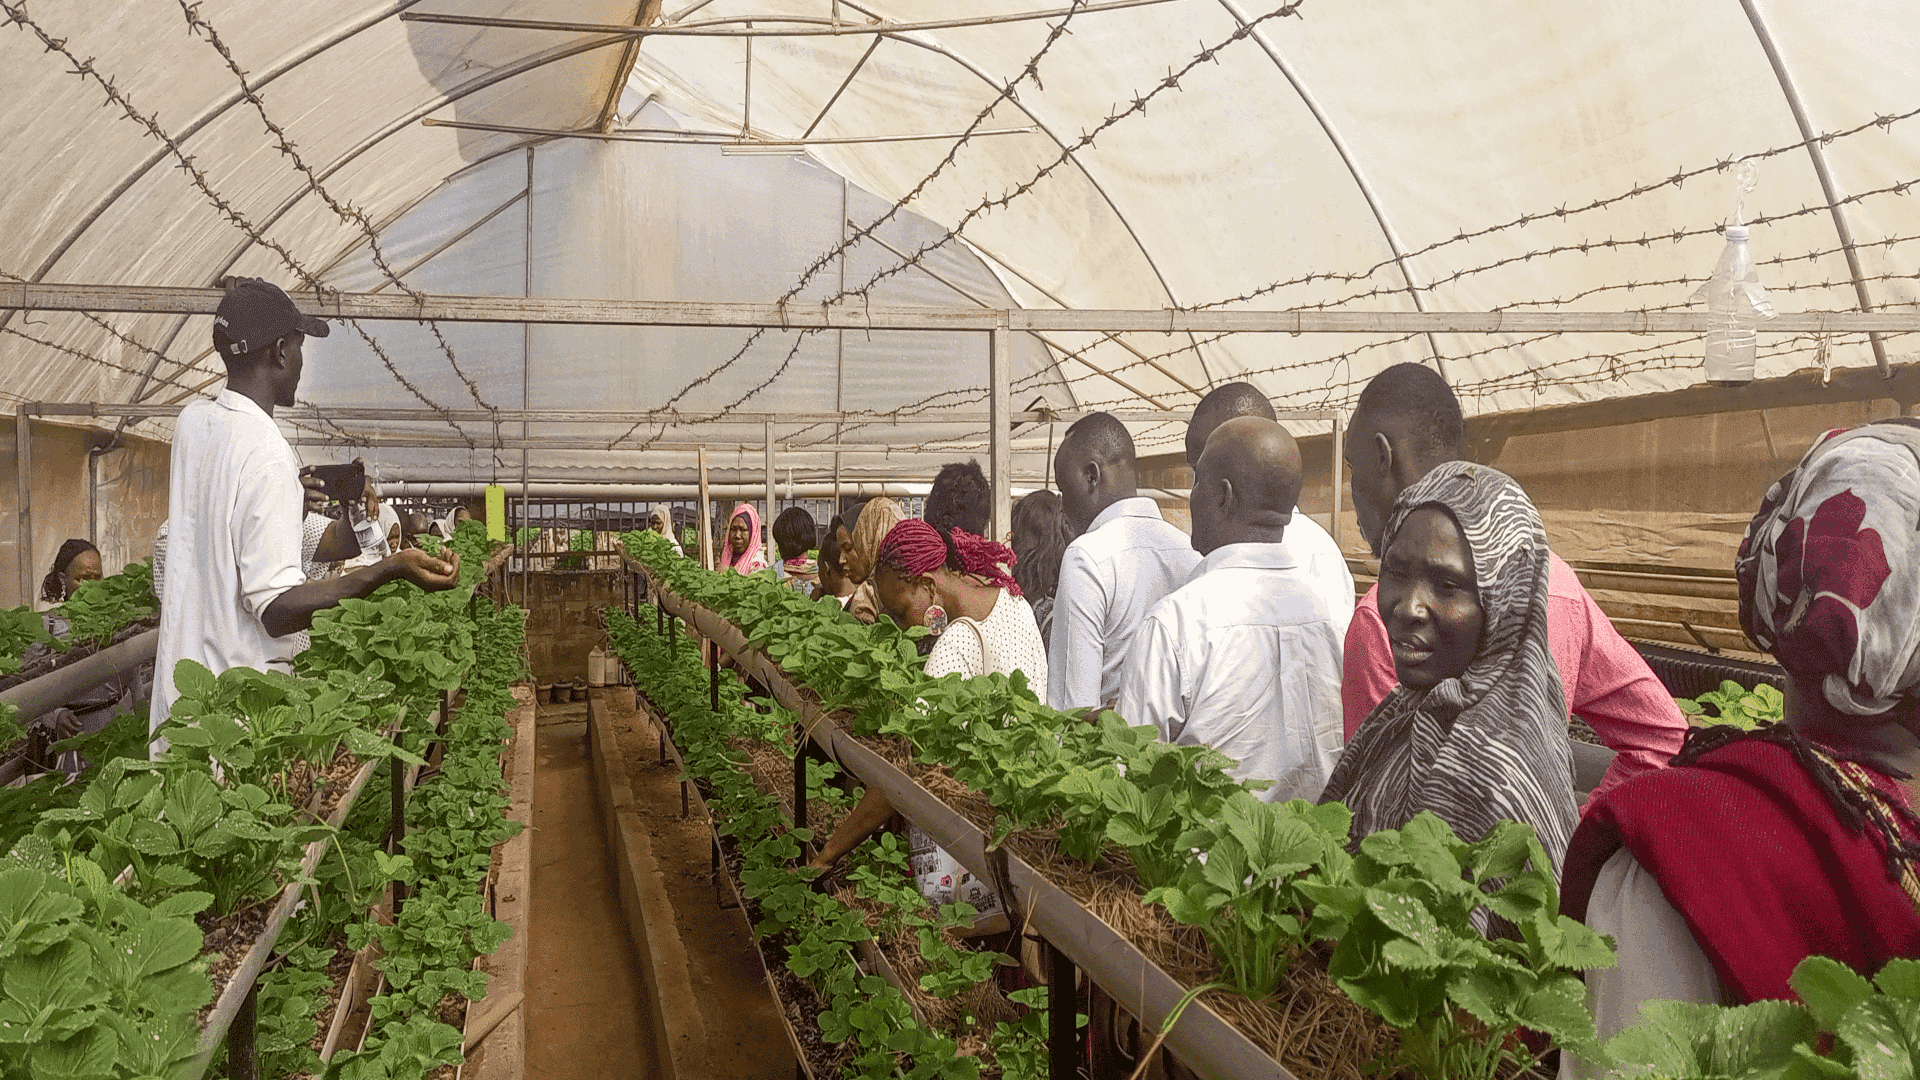 Members of USLAs formed by KOWED touring Capsicum Valley Products farm during a training of hydroponic farm setup and vertical farming management - Re:BUiLD